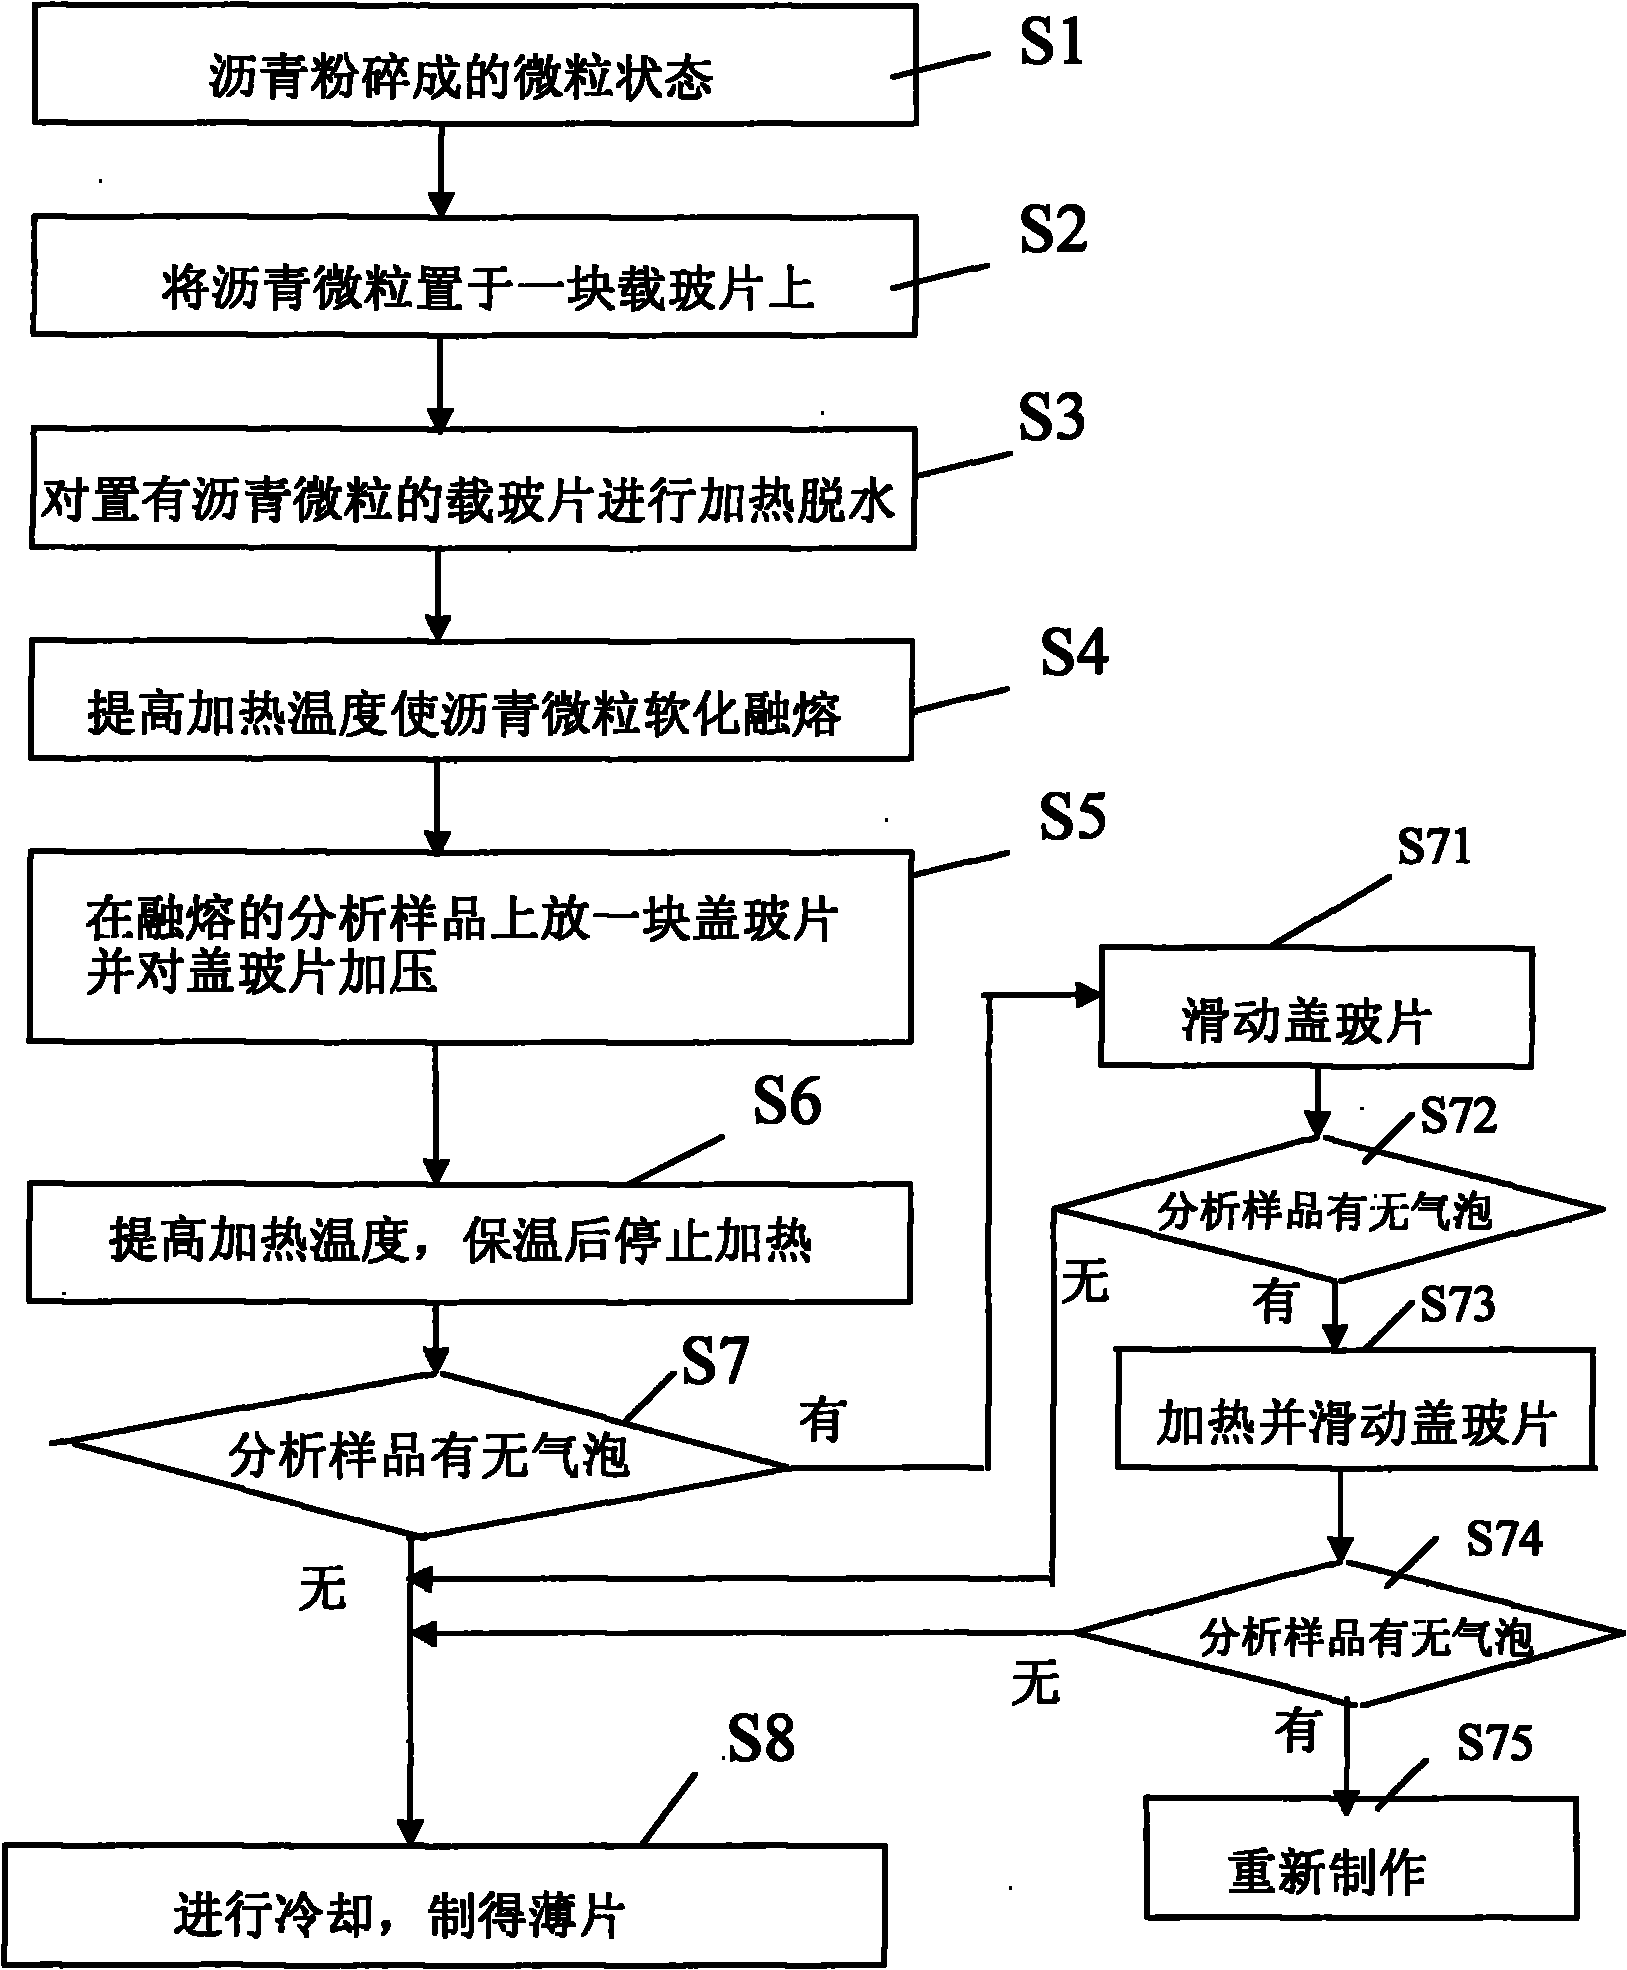 Preparation method of pitch microsection